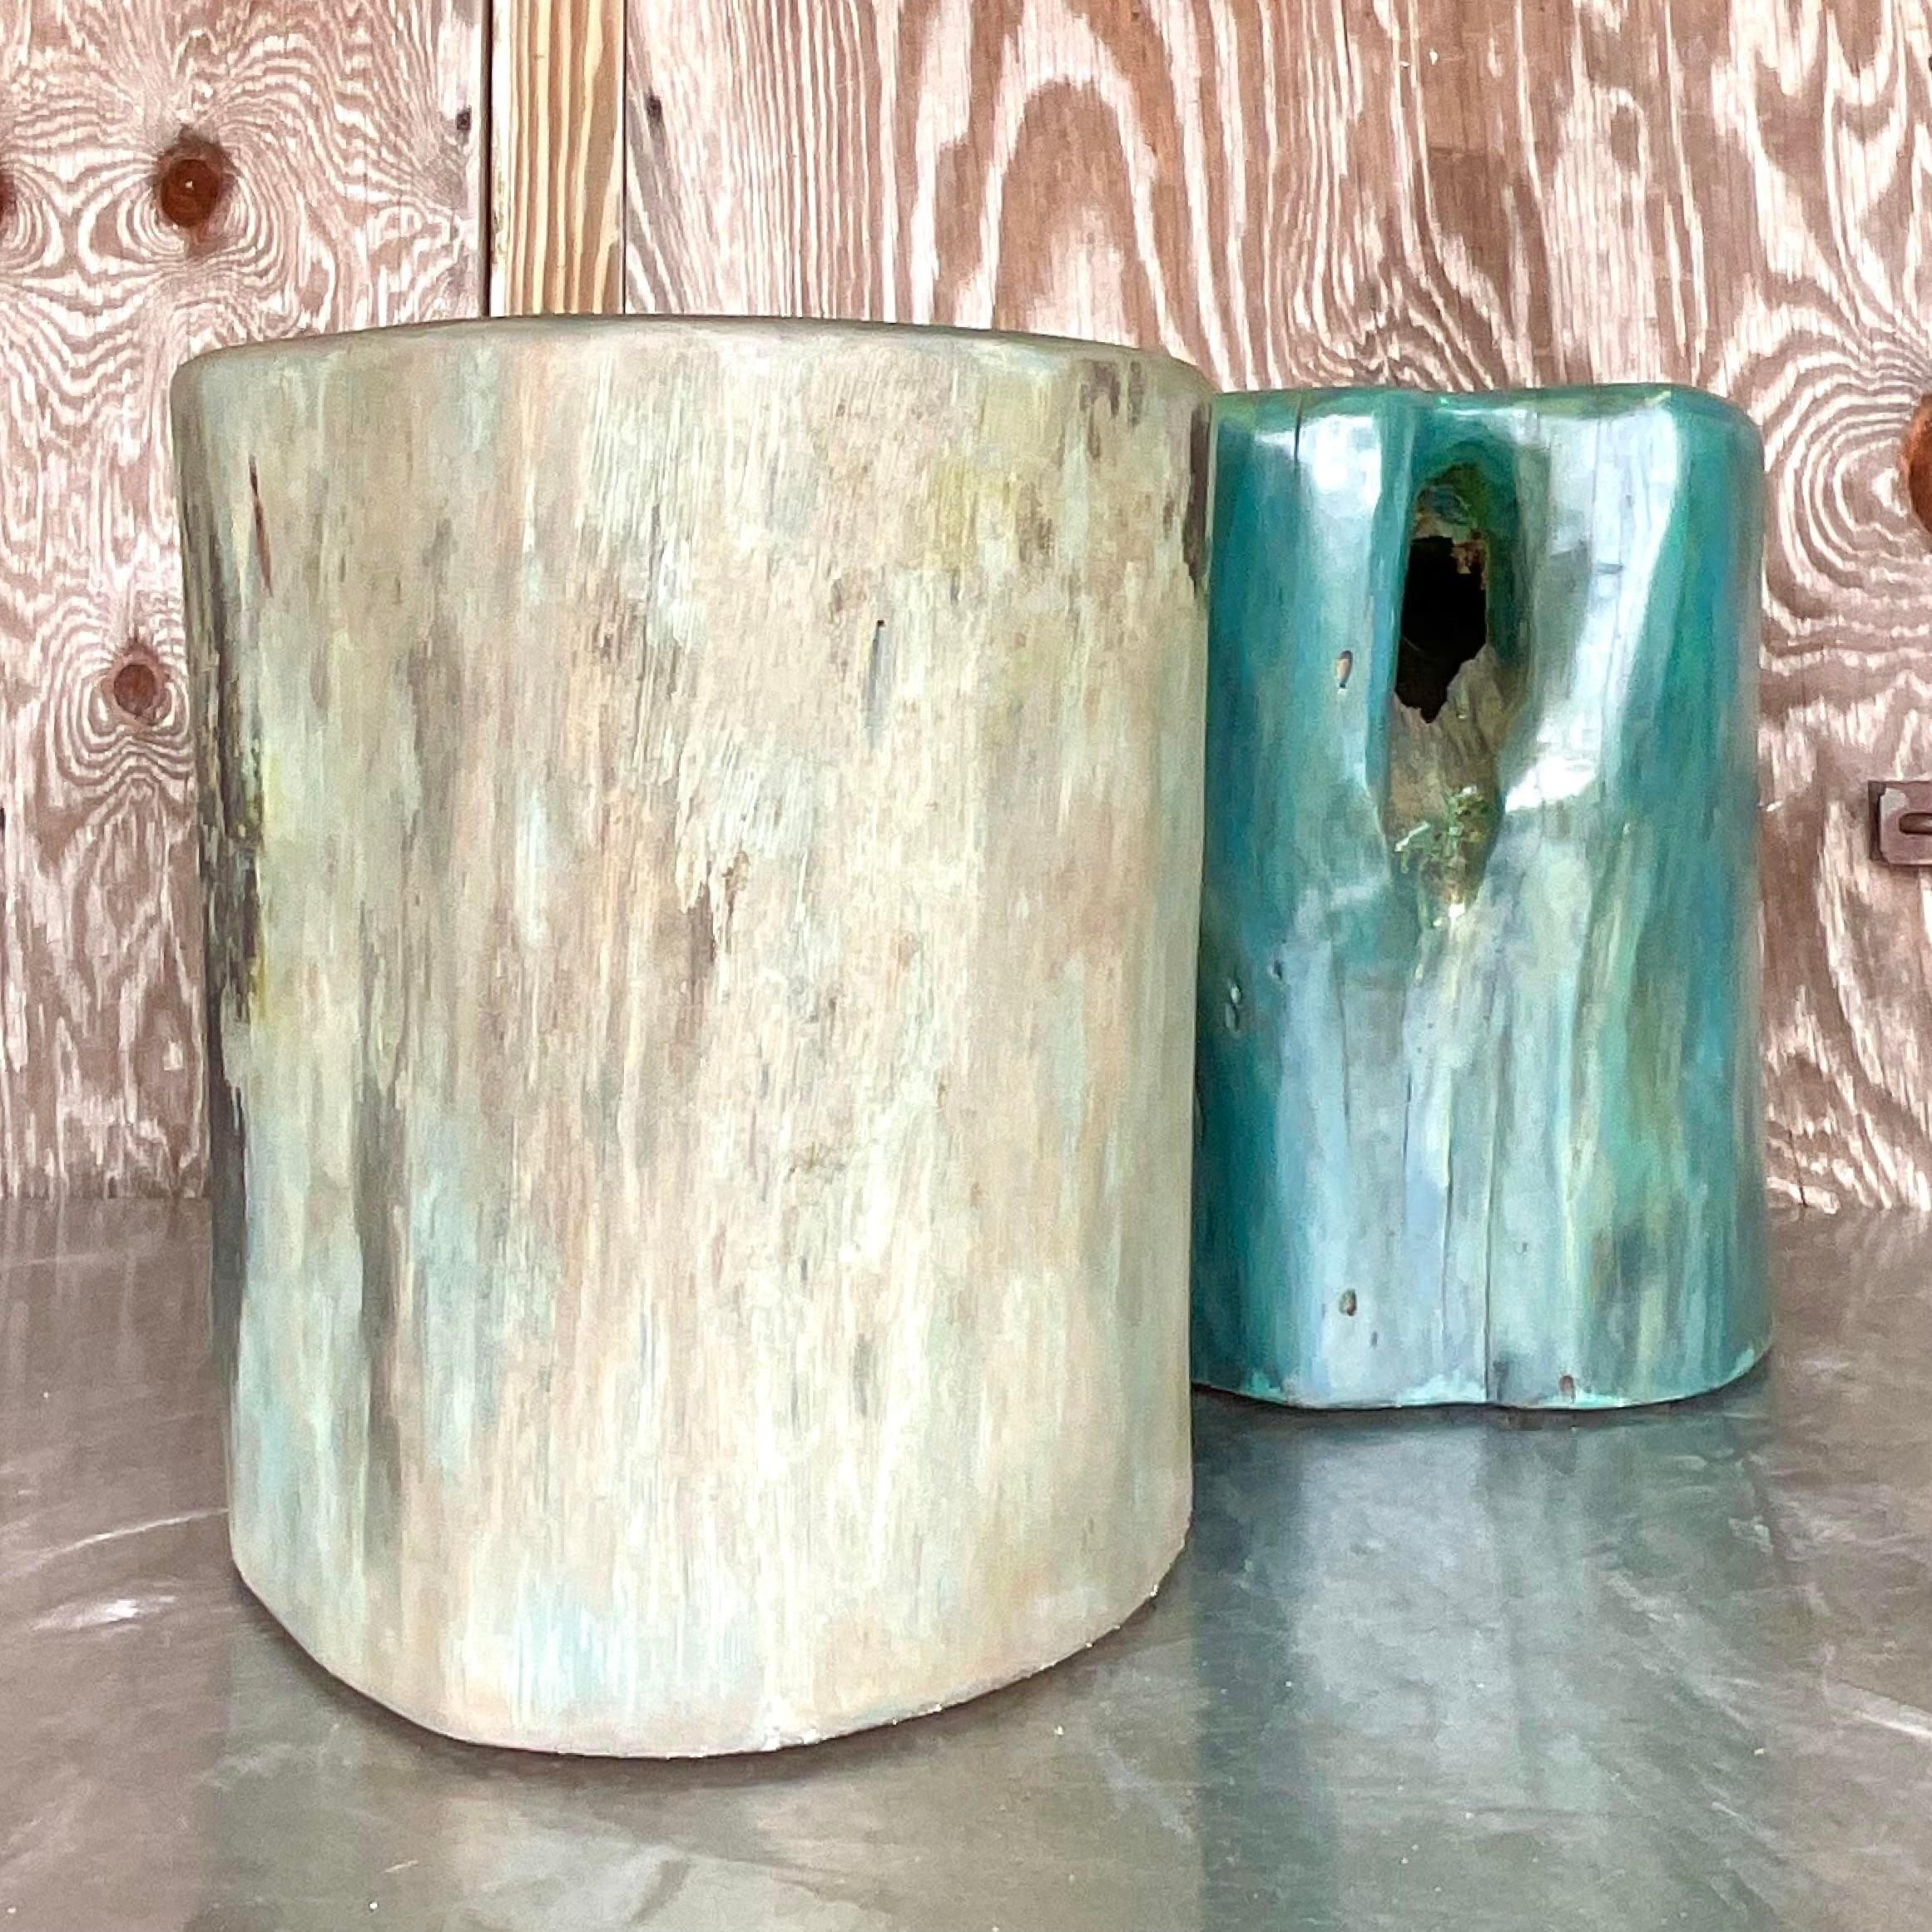 A stunning set of two vintage Boho low stools. A chic blue green color wash on two organic tree stump stools. Solid wood make them perfect as seating, drink tables or pedestals. You decide! Acquired from a Palm Beach estate.

Smaller stools